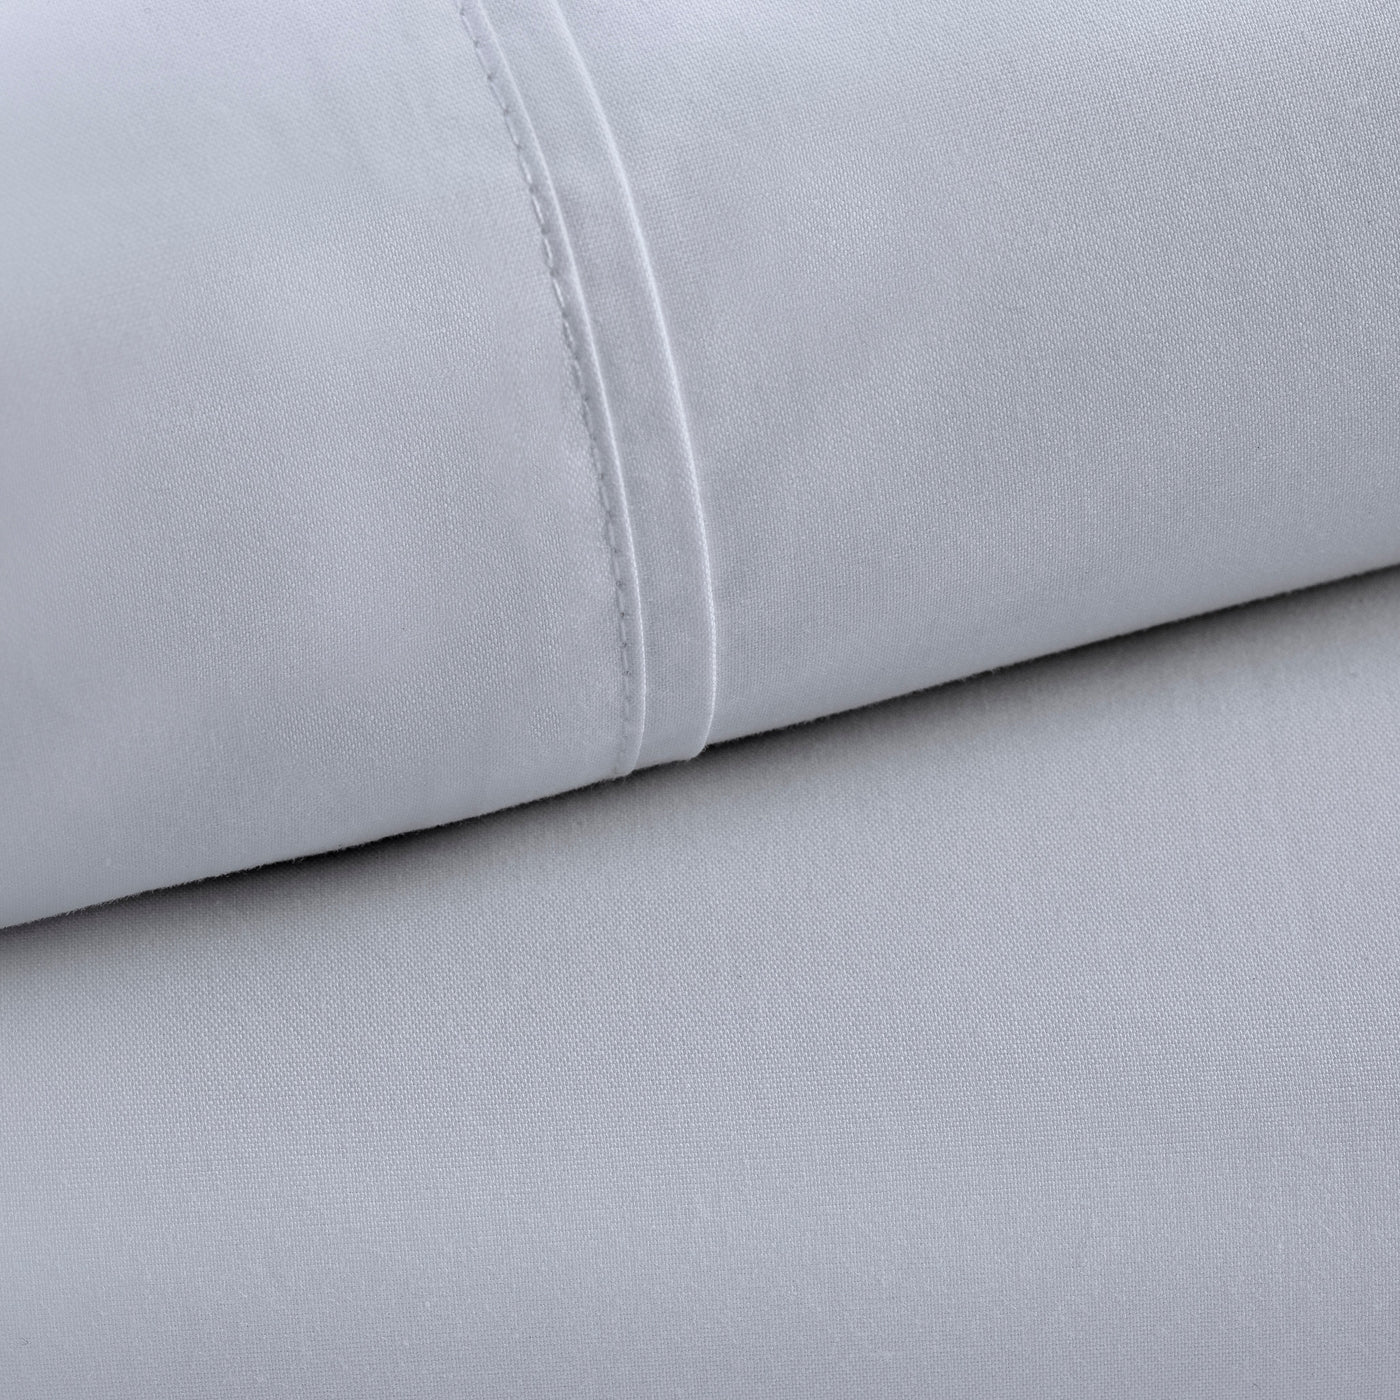 415 Thread Count Percale Bed Sheet Set | Slate